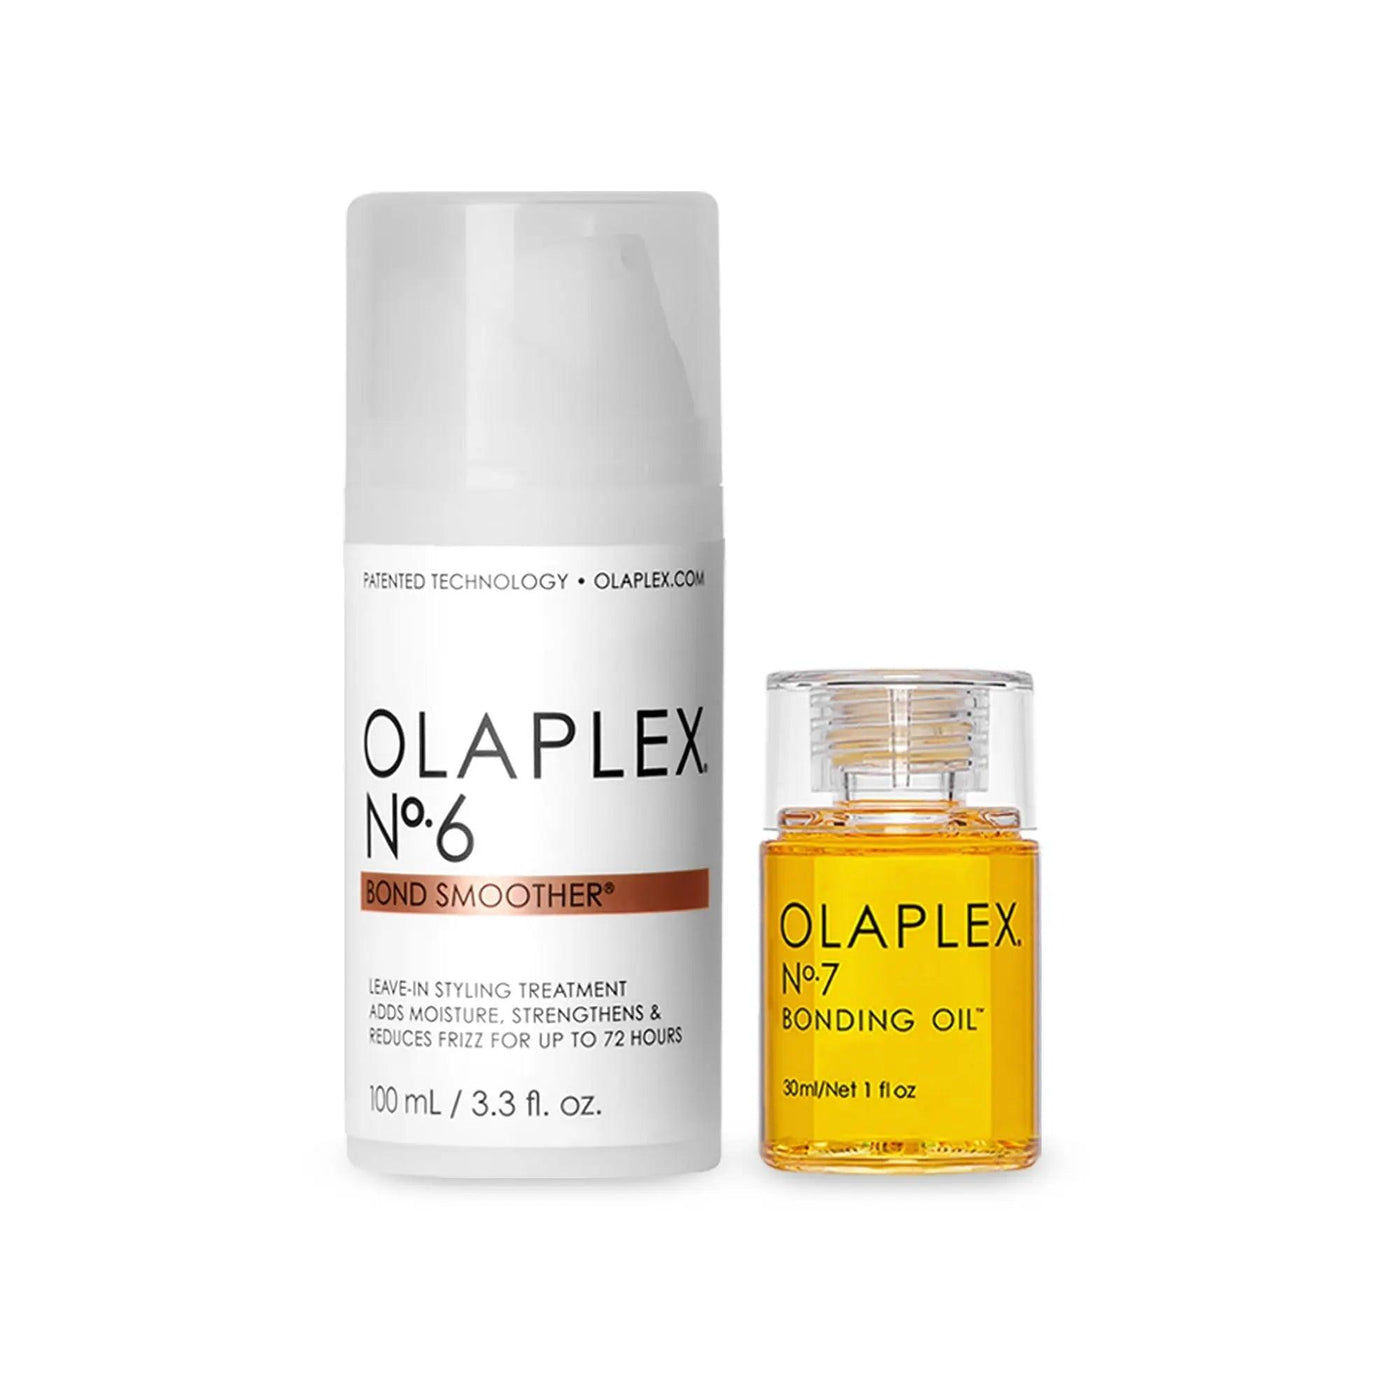 ICONIC STYLING DUO Olaplex Boutique Deauville